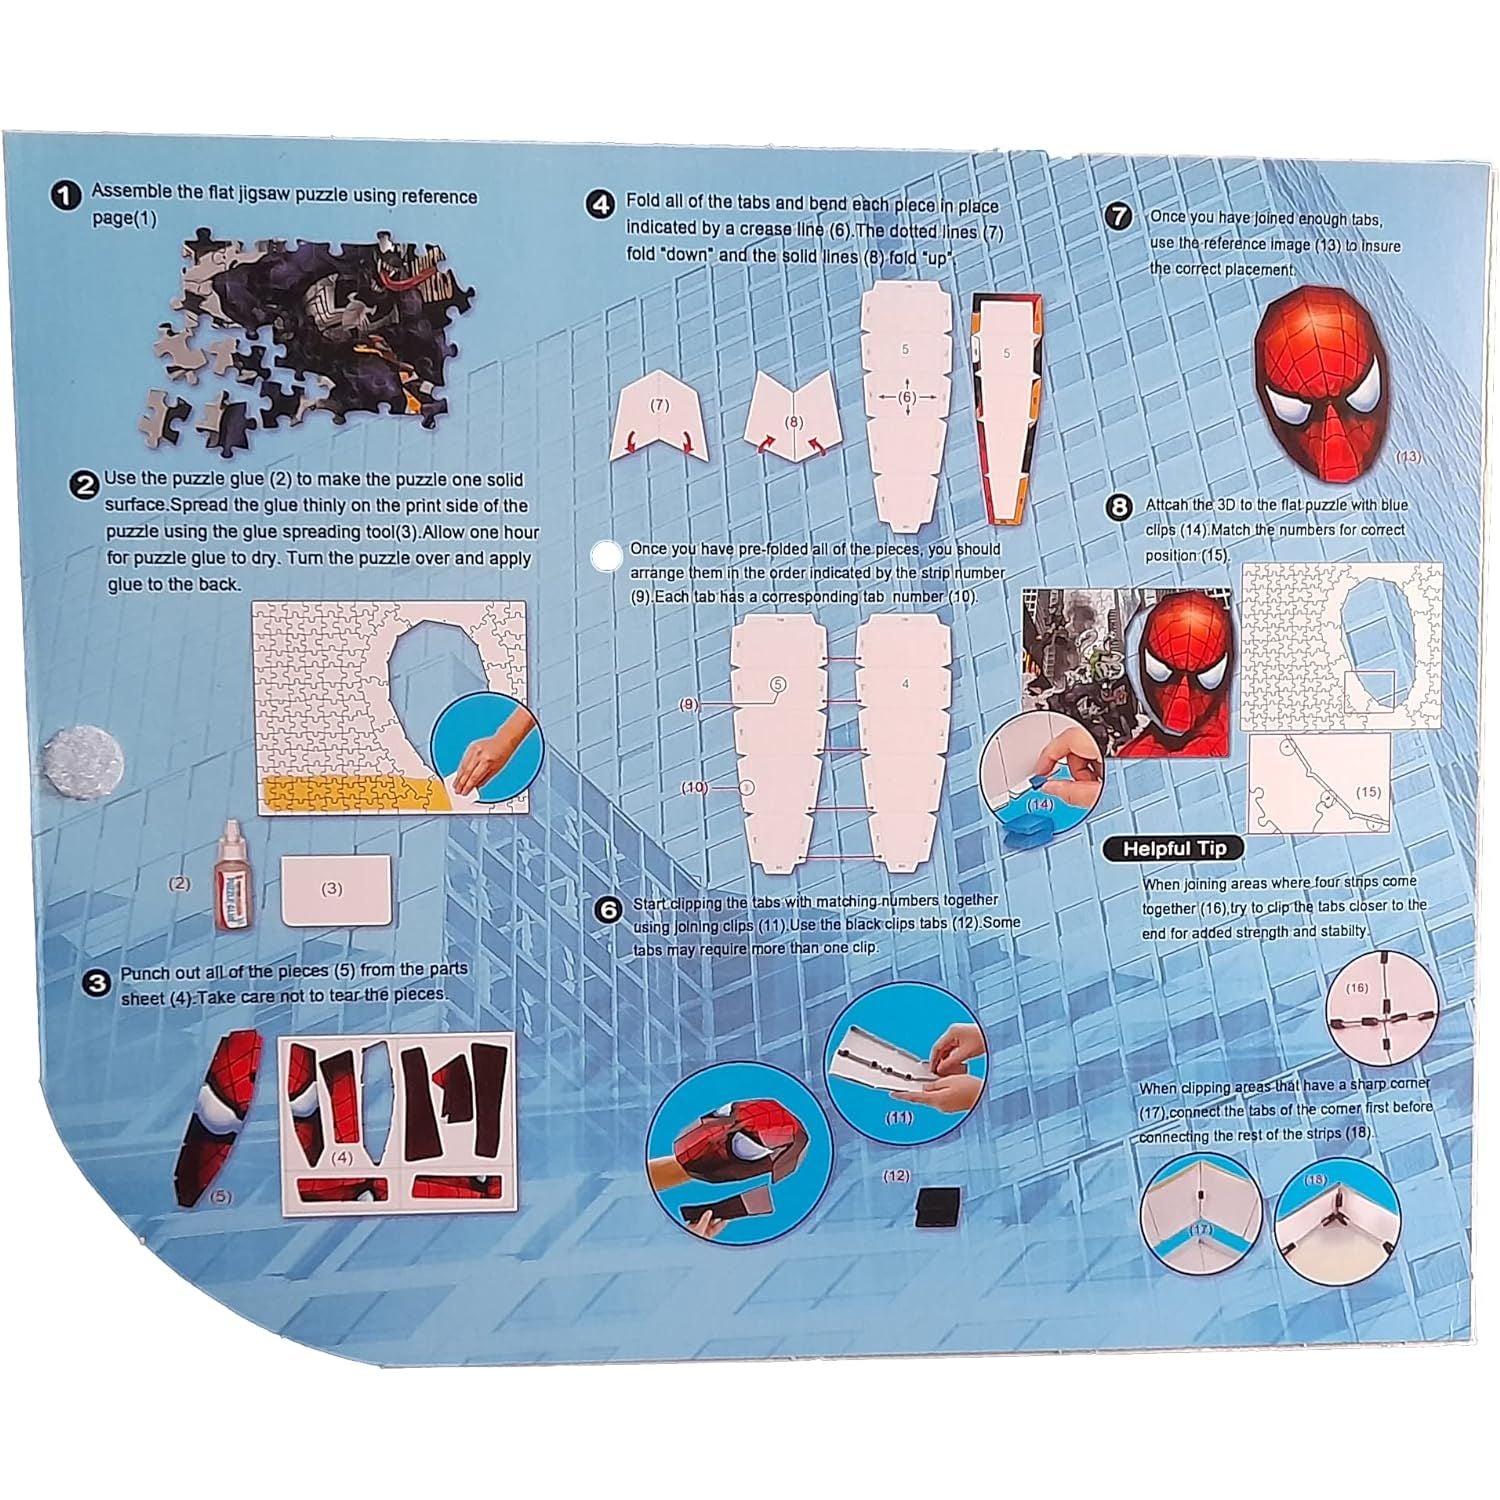 Spider Man Real 3D Puzzle Everything For Children